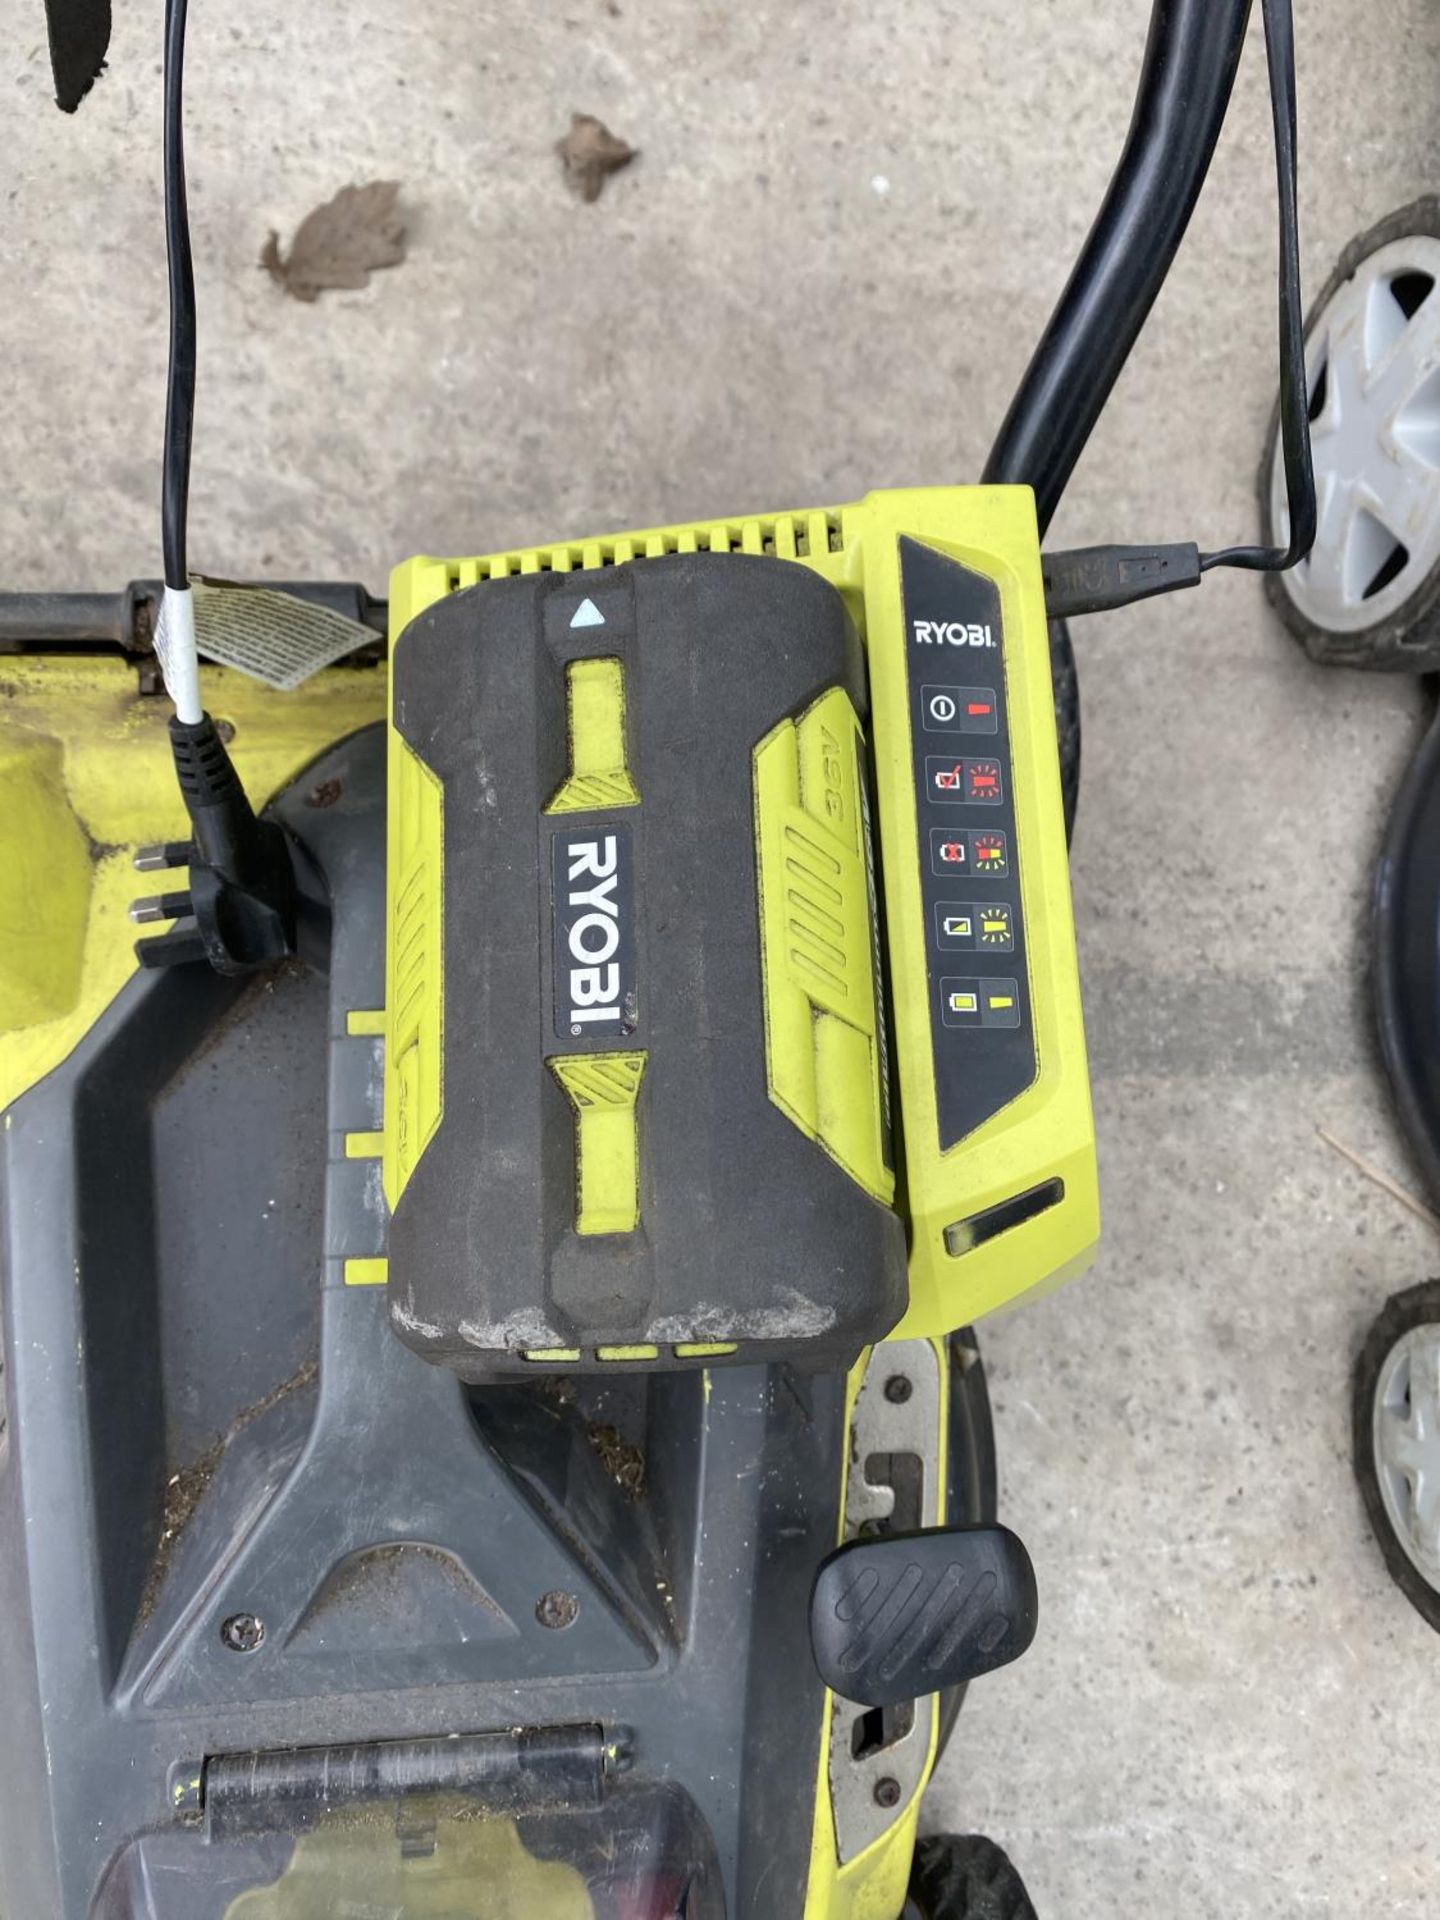 A CORDLESS RYOBI 36V MOWER WITH CHARGER AND BATTERY NO VAT - Image 3 of 4